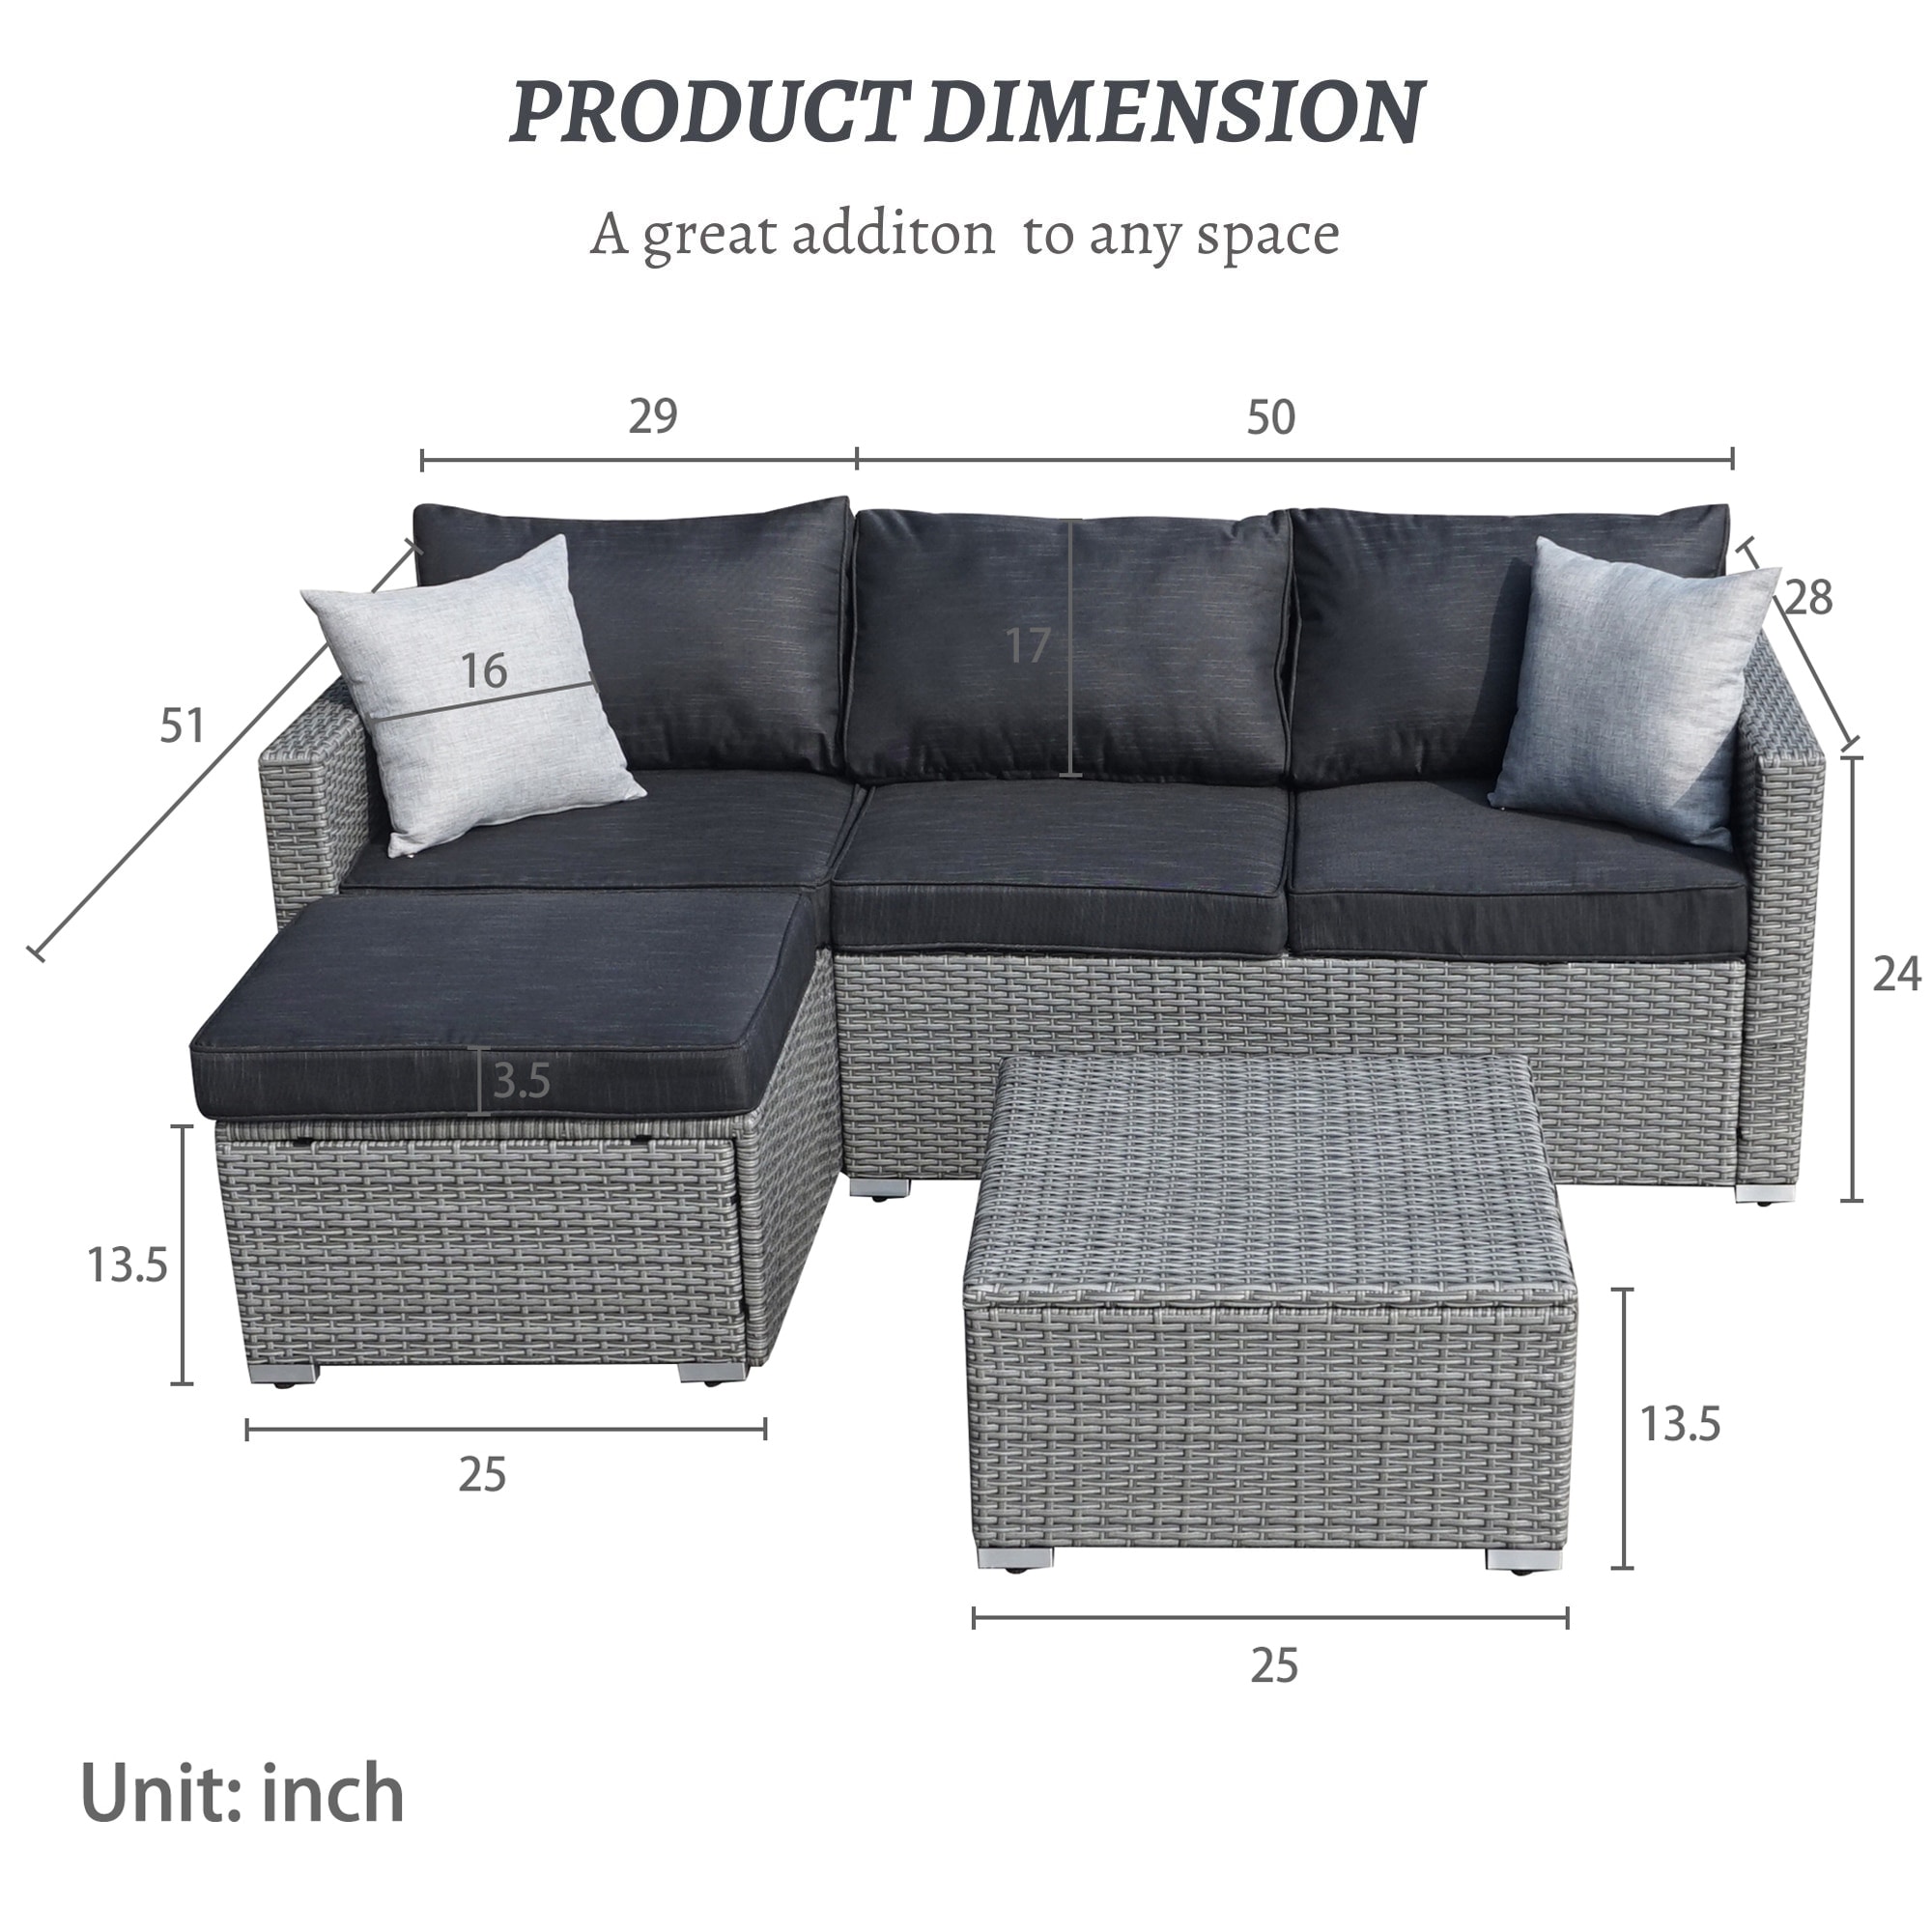 South Sea Outdoor New Java 3-Piece Outdoor Sectional Set w/ Square Corner  in Sandstone CODE:UNIV10 for 10% Off